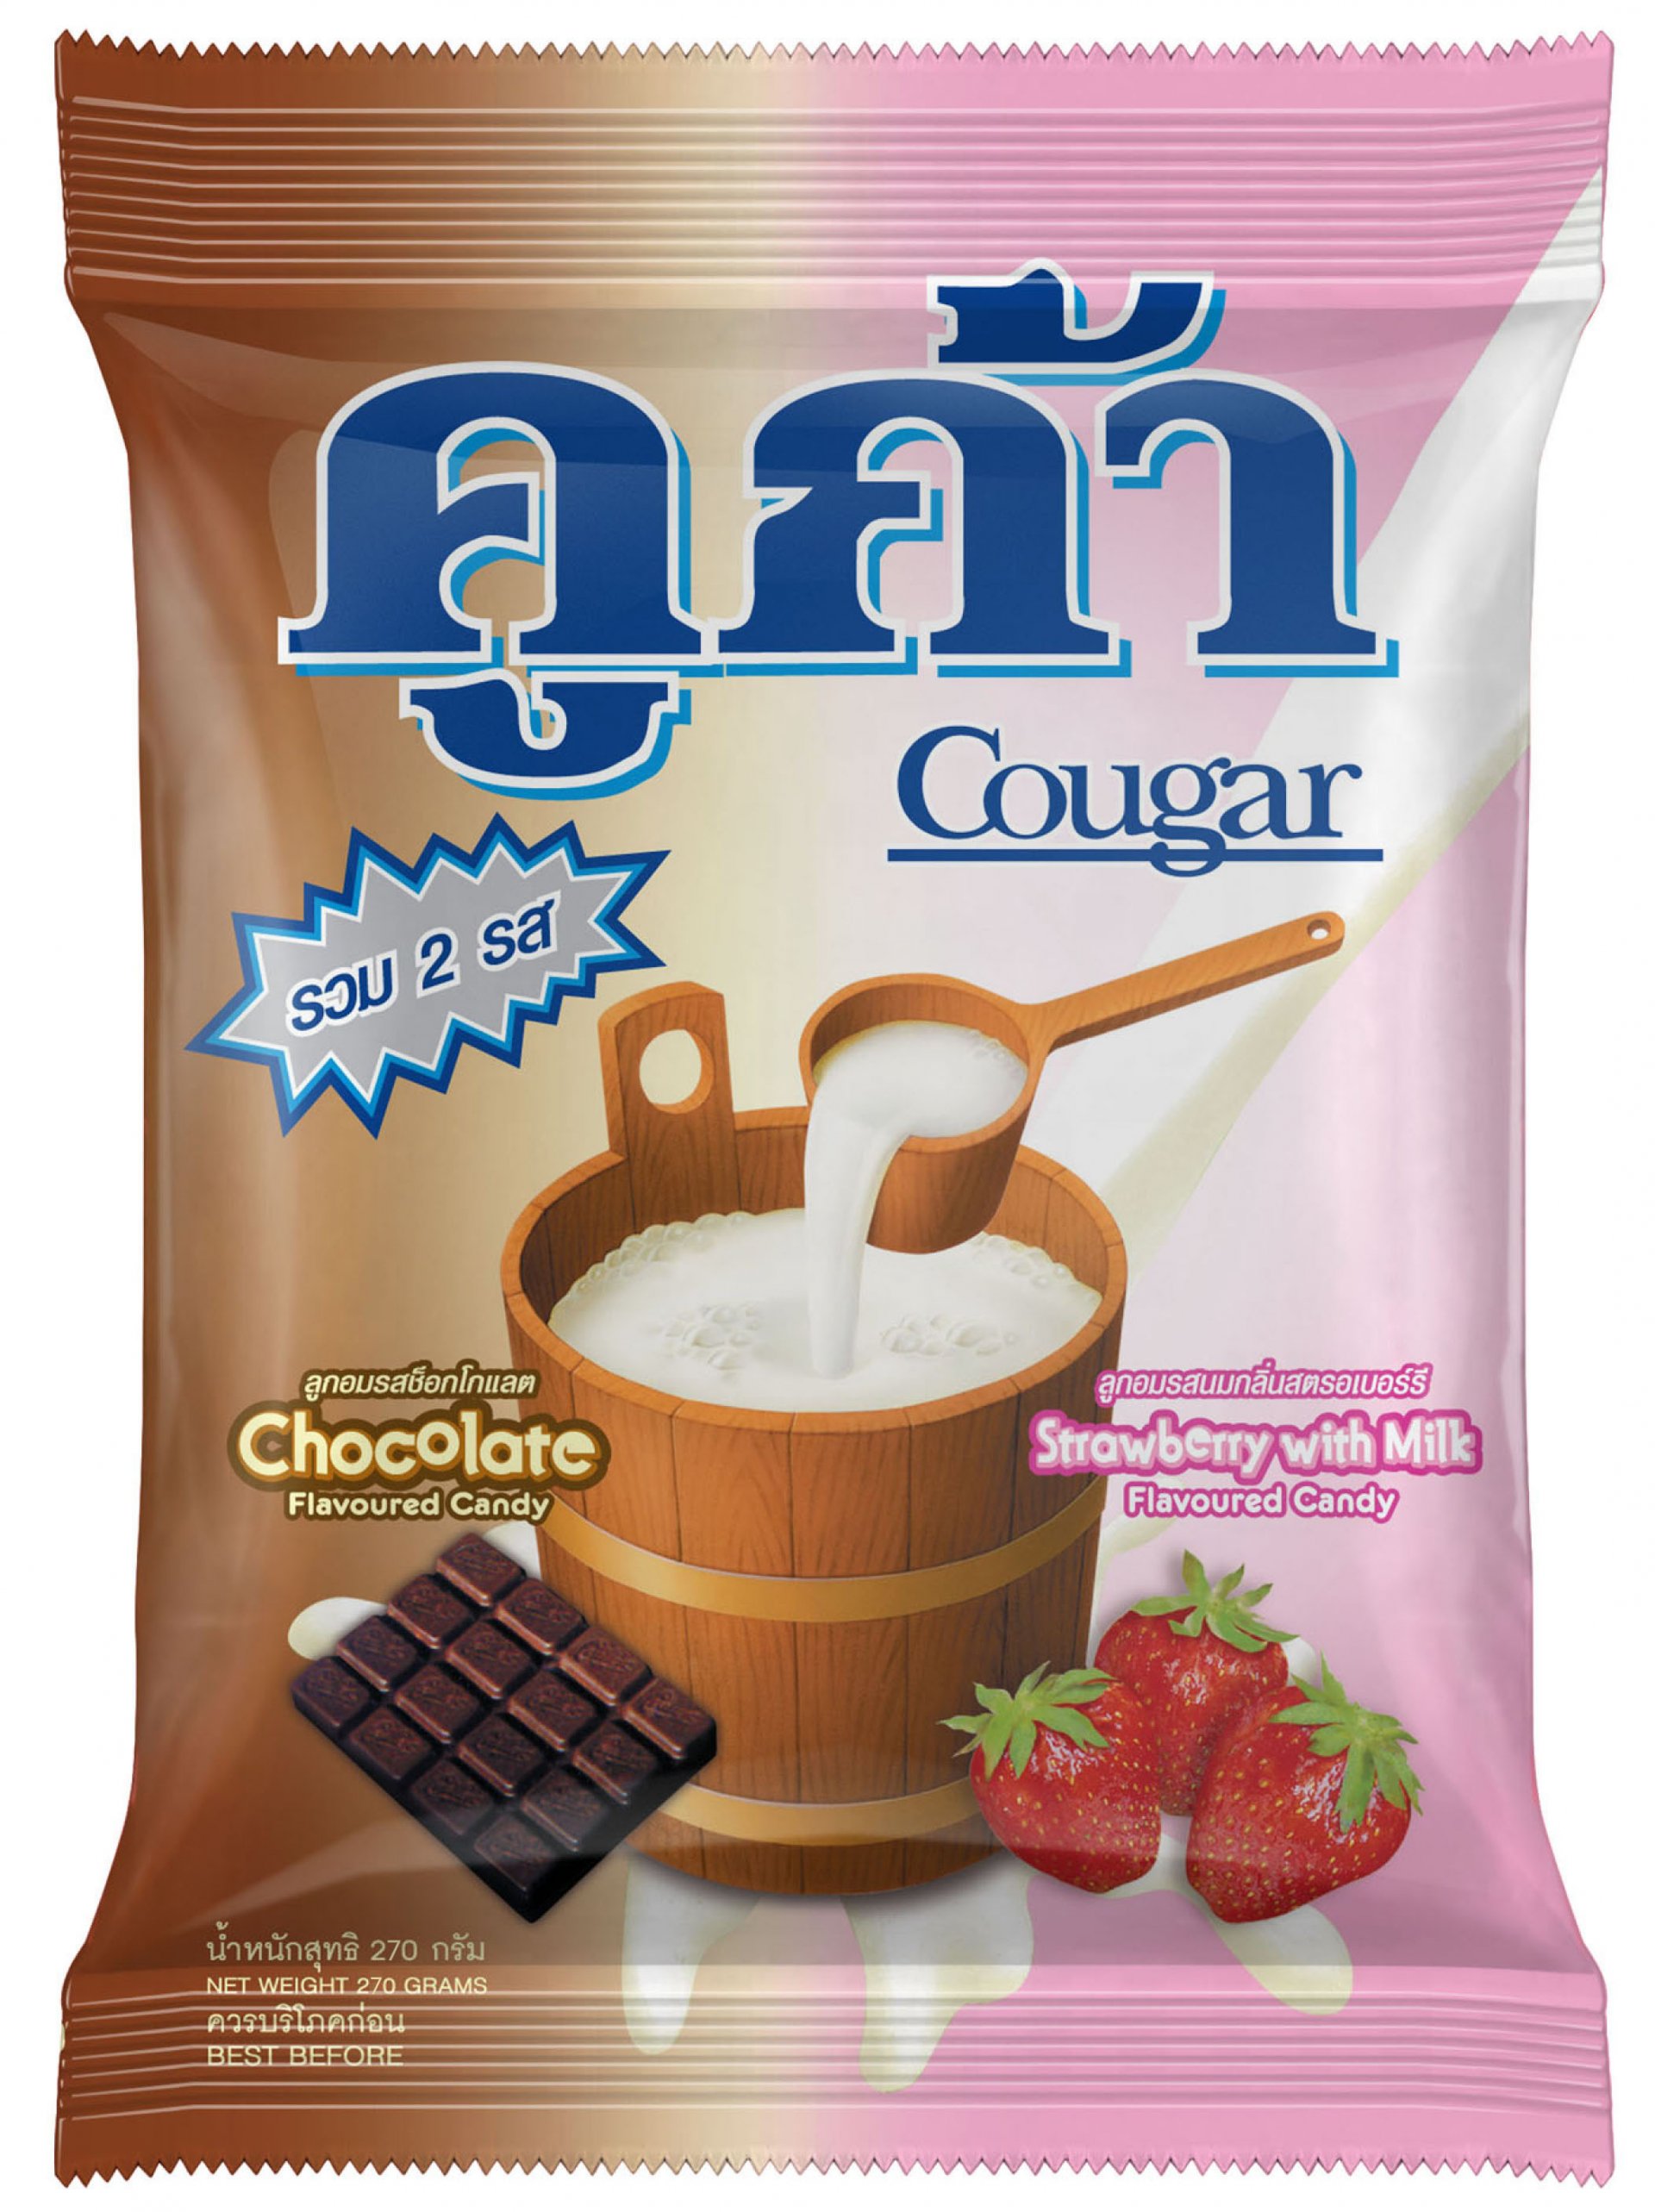 Cougar Chocolate Flavoured CandyXCougar Strawberry with Milk Flavoured Candy